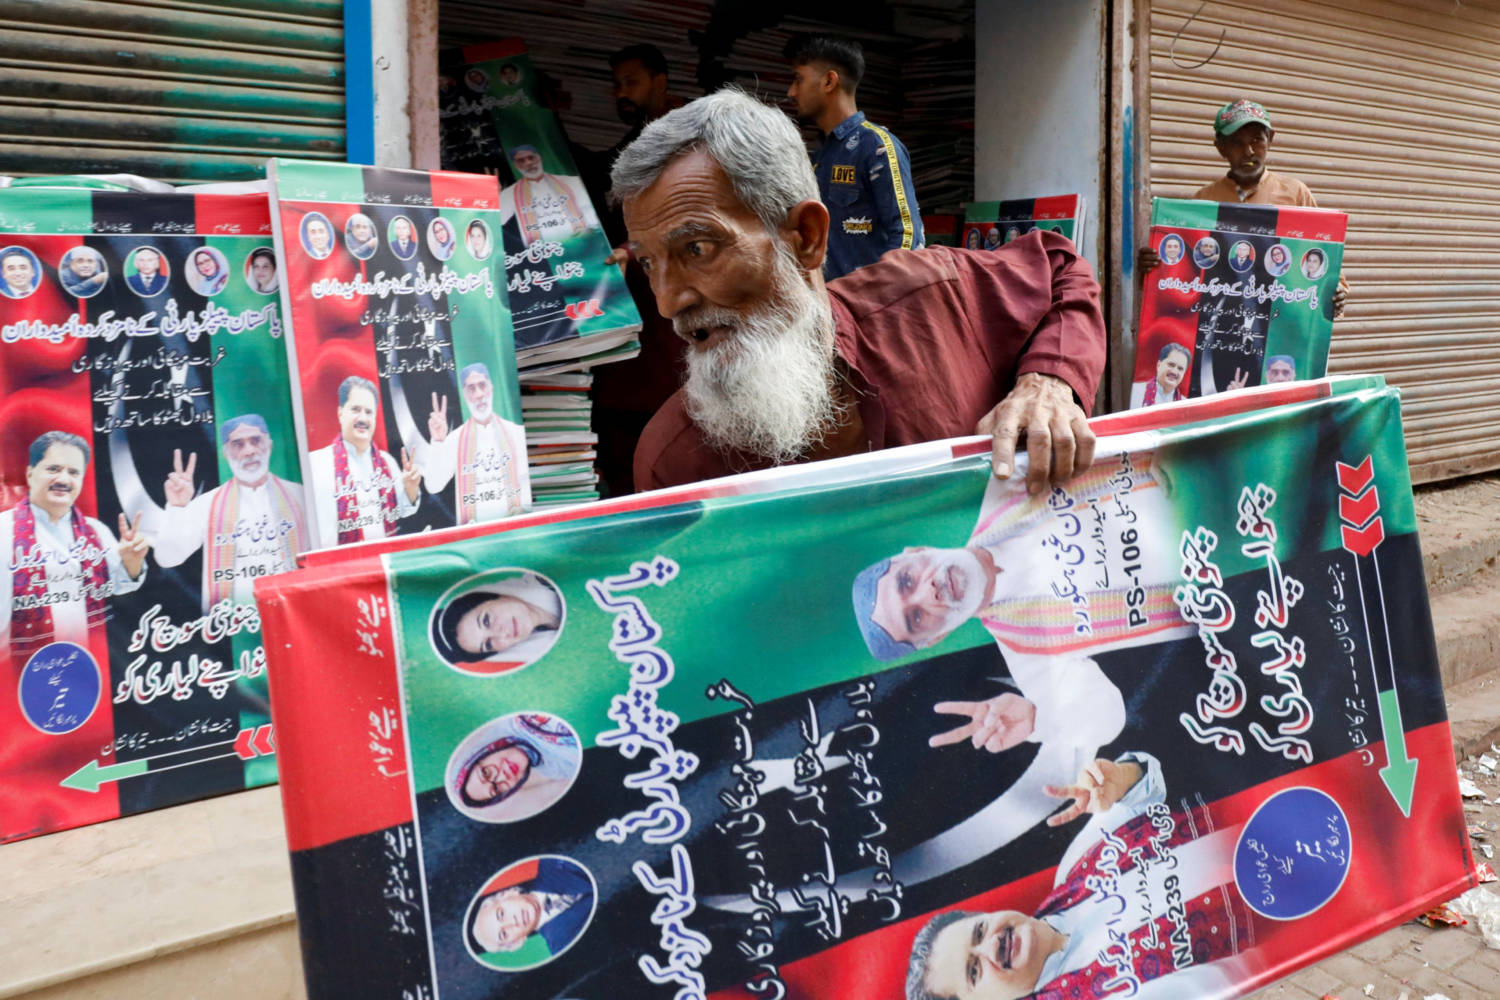 A Worker Carries Campaign Posters Of A Political Party To Decorate The Area, Ahead Of General Elections, In Karachi